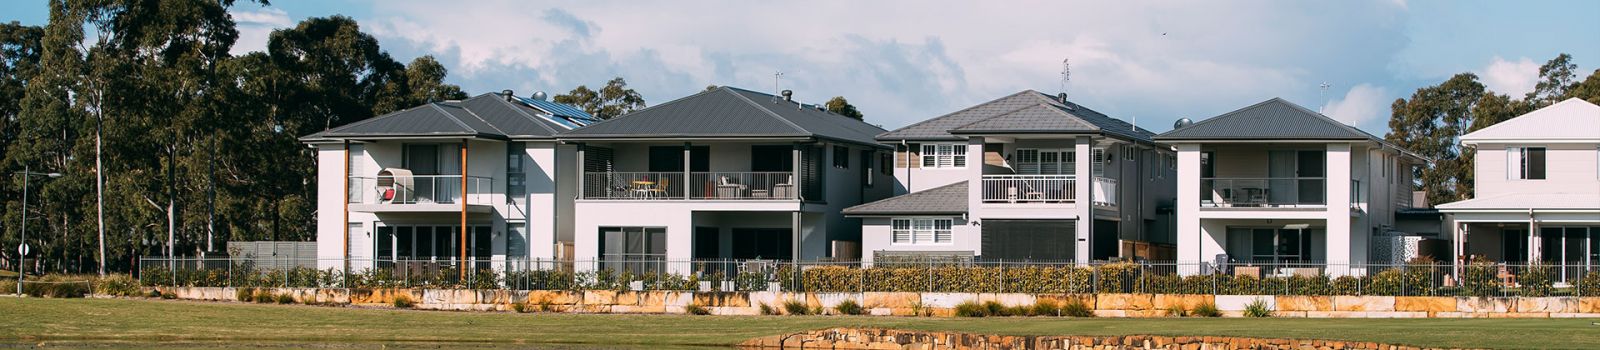 Image of a line of houses over looking a golf course banner image